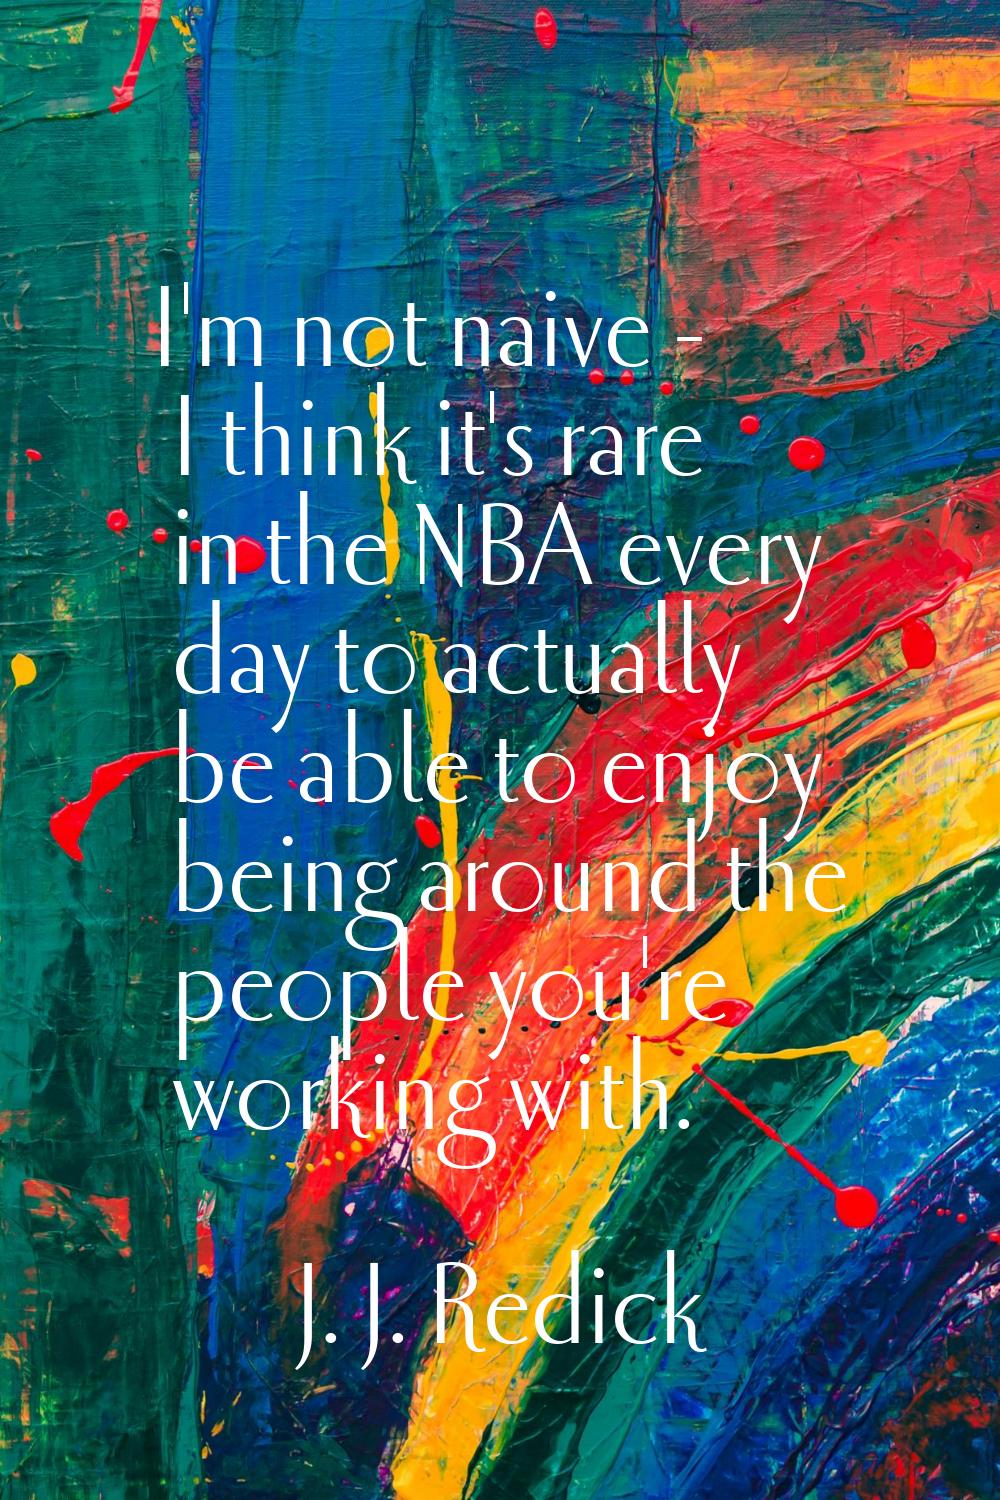 I'm not naive - I think it's rare in the NBA every day to actually be able to enjoy being around th